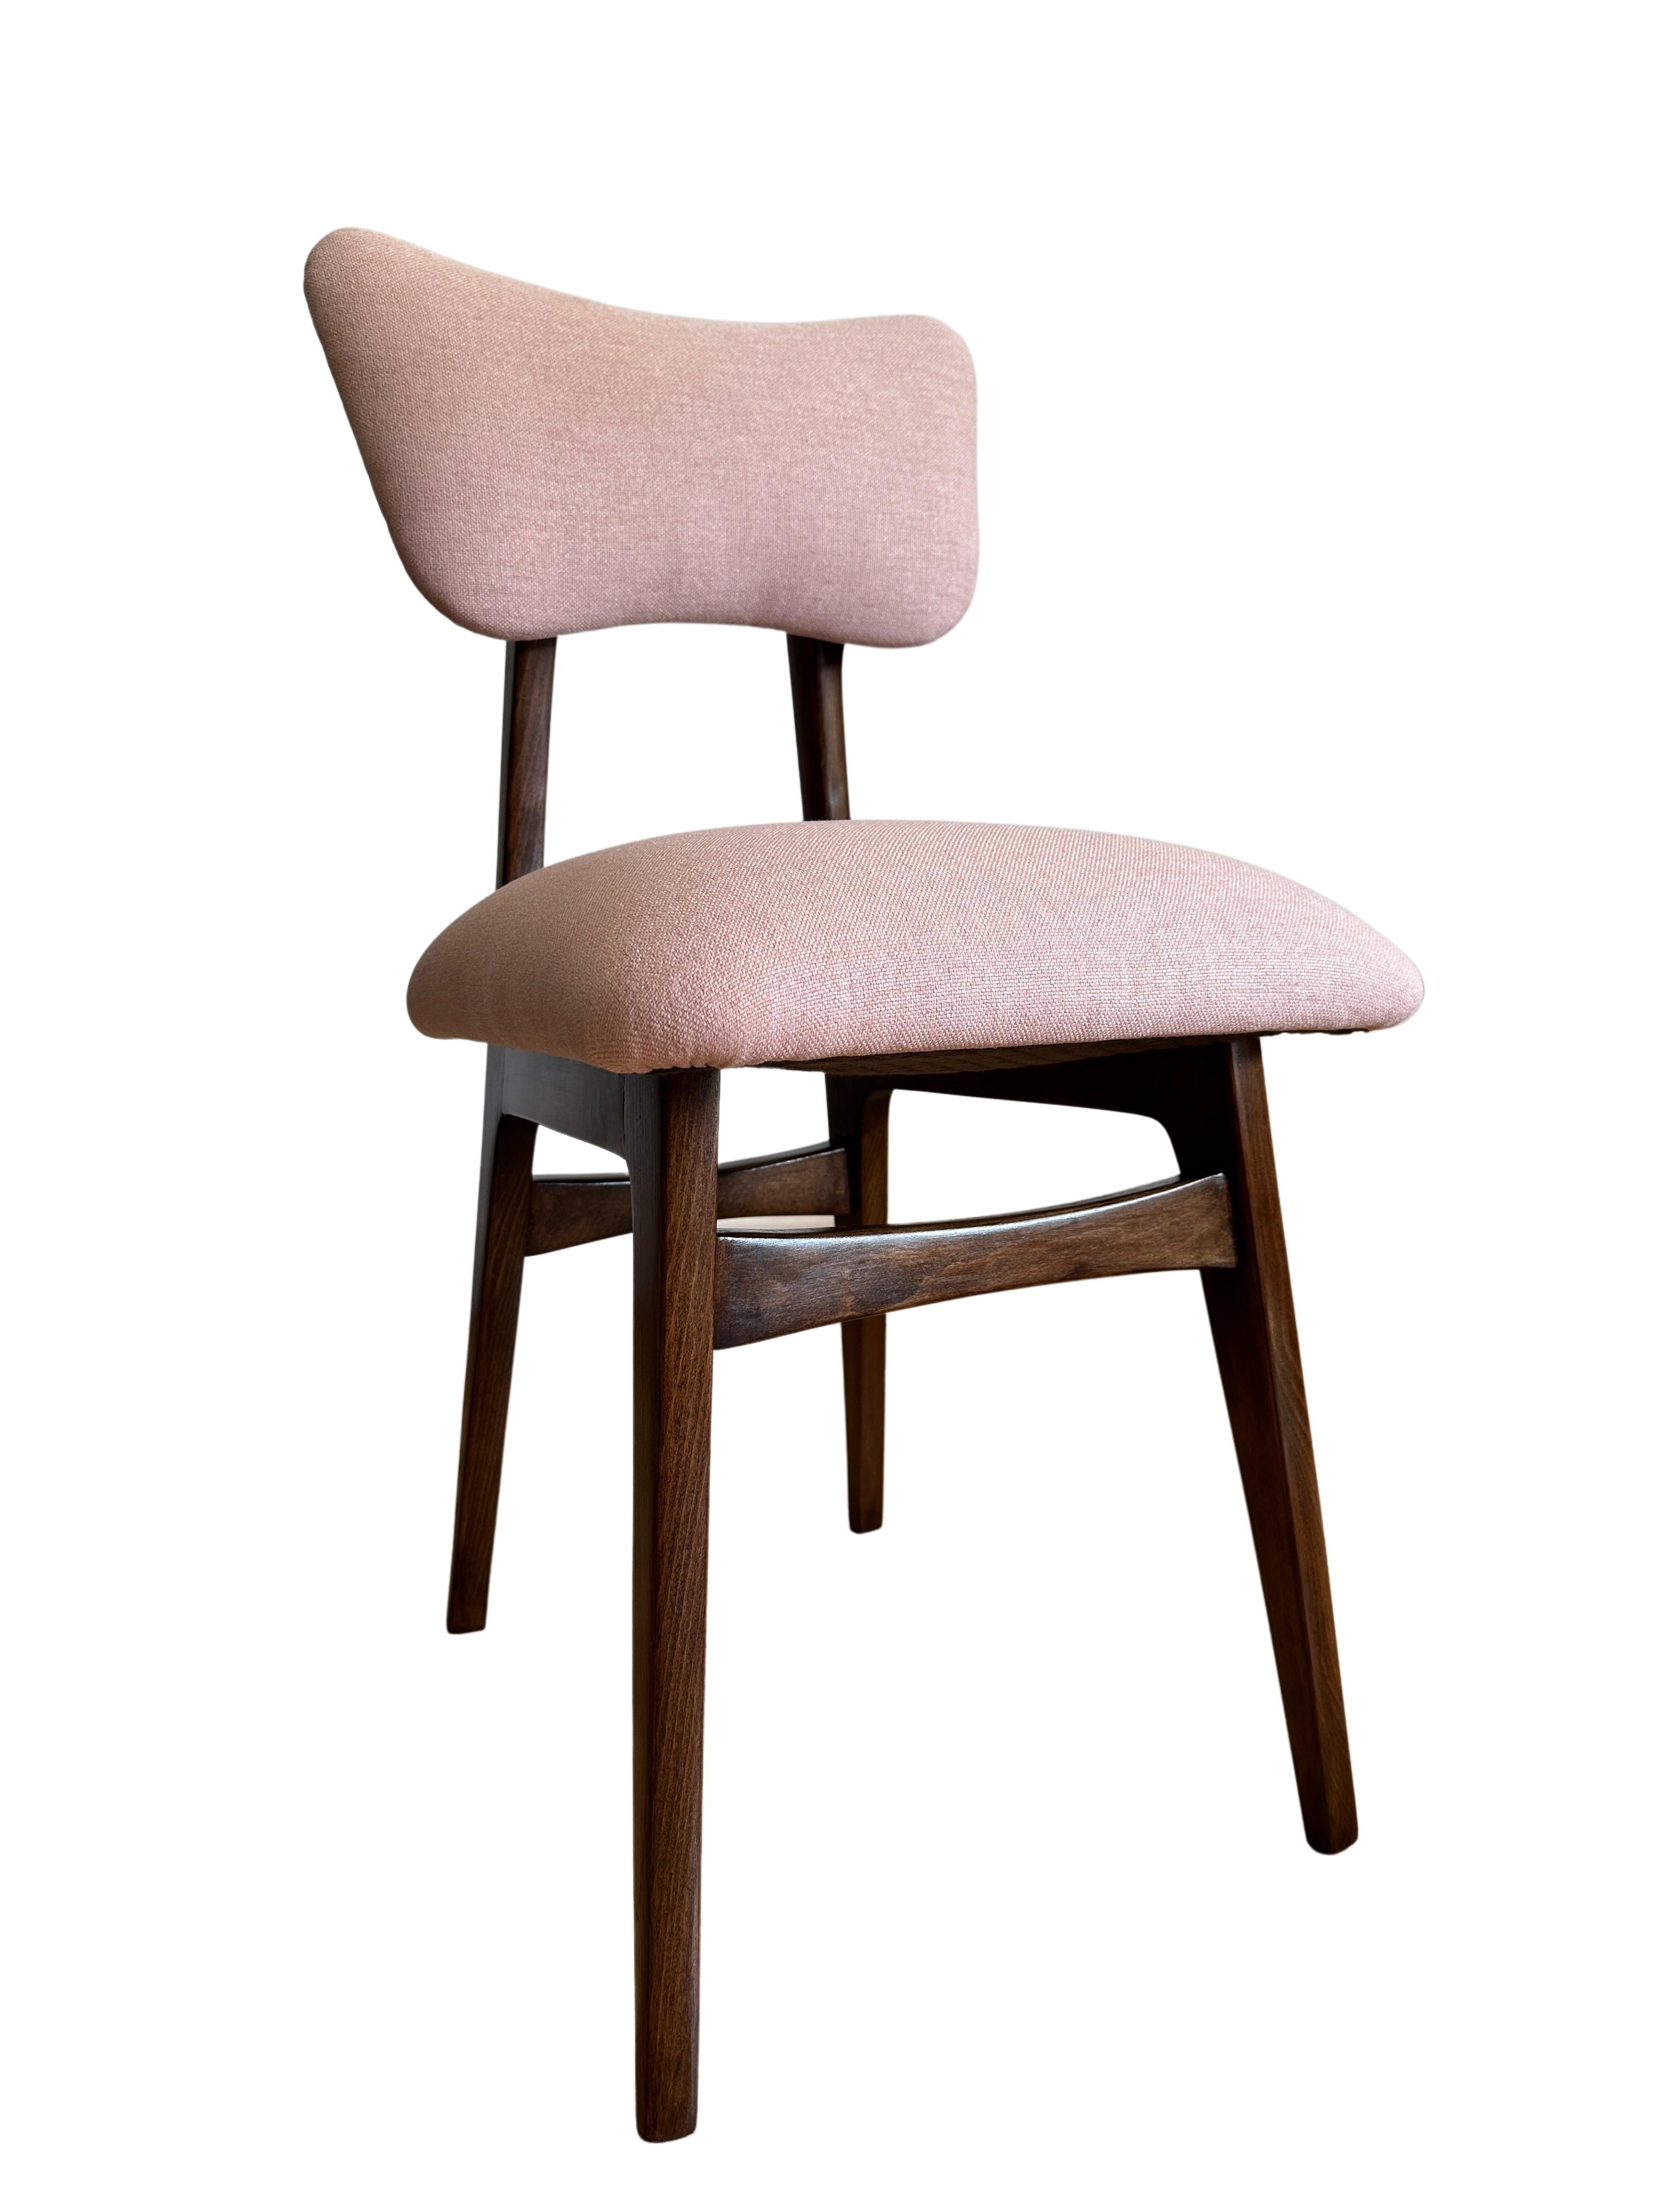 Midcentury Wooden Dining Chair in Light Pink Upholstery, Europe, 1960s For Sale 1